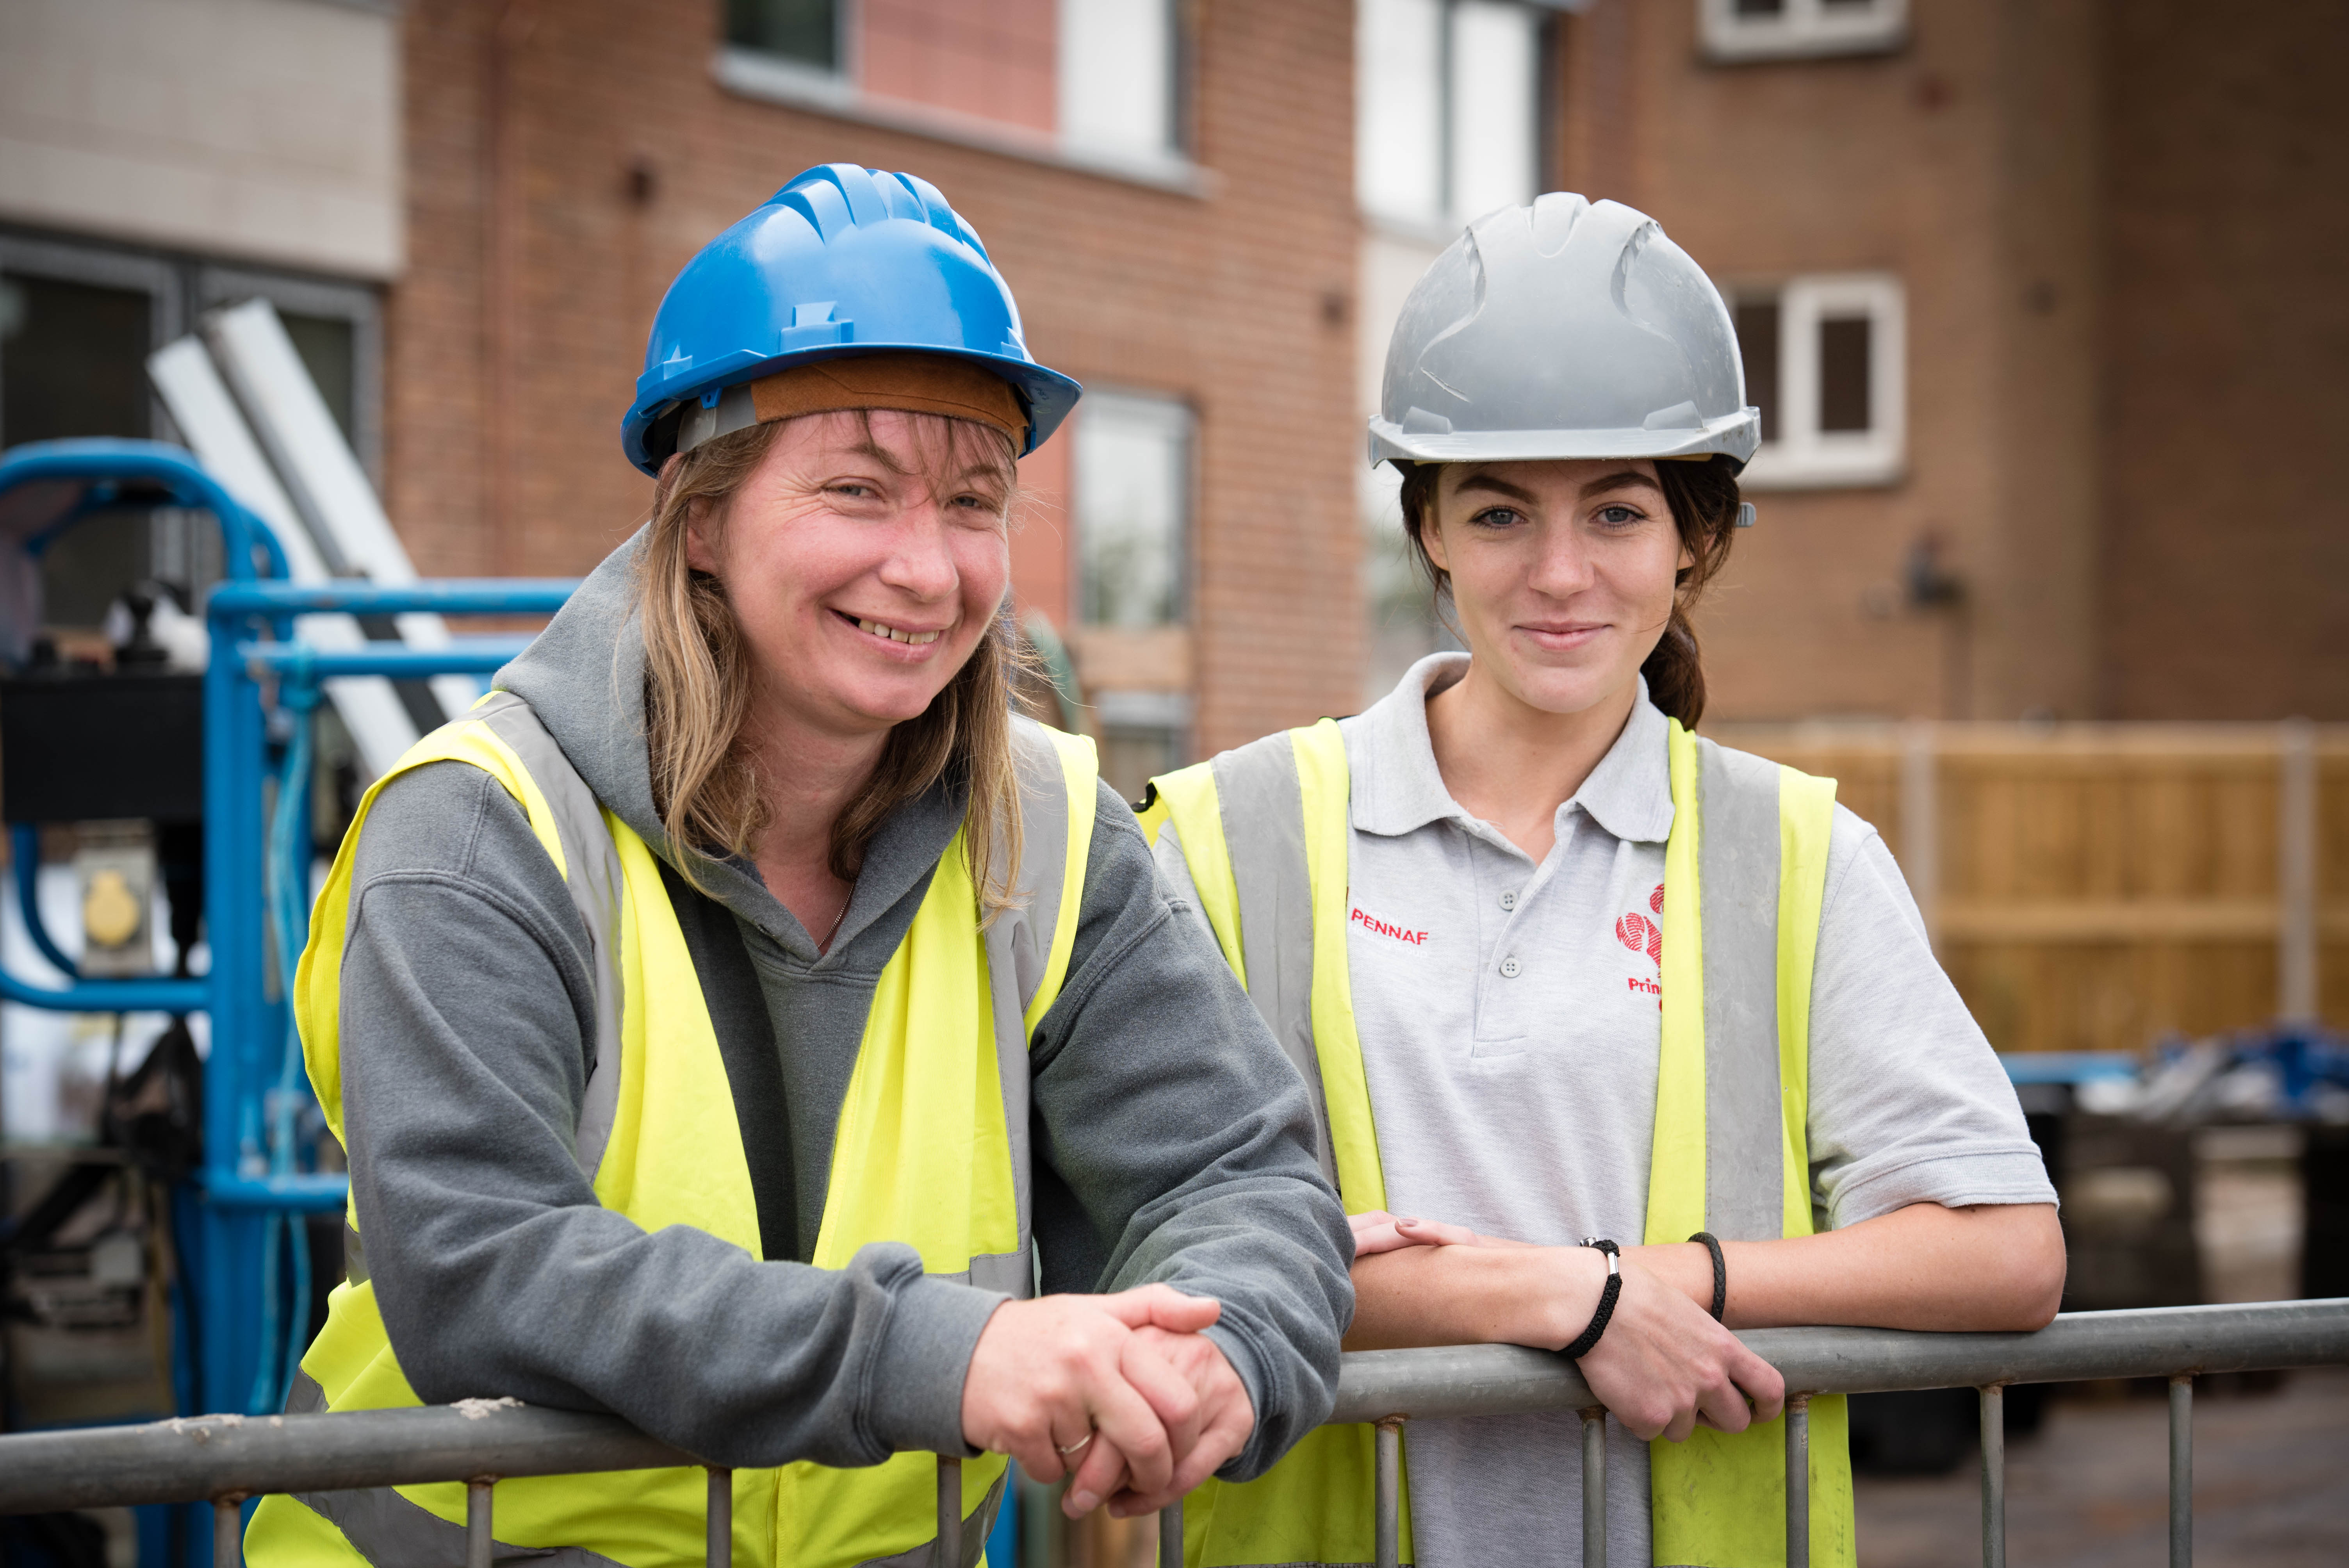 Young mum Alleisha dreams of a construction career as a joiner